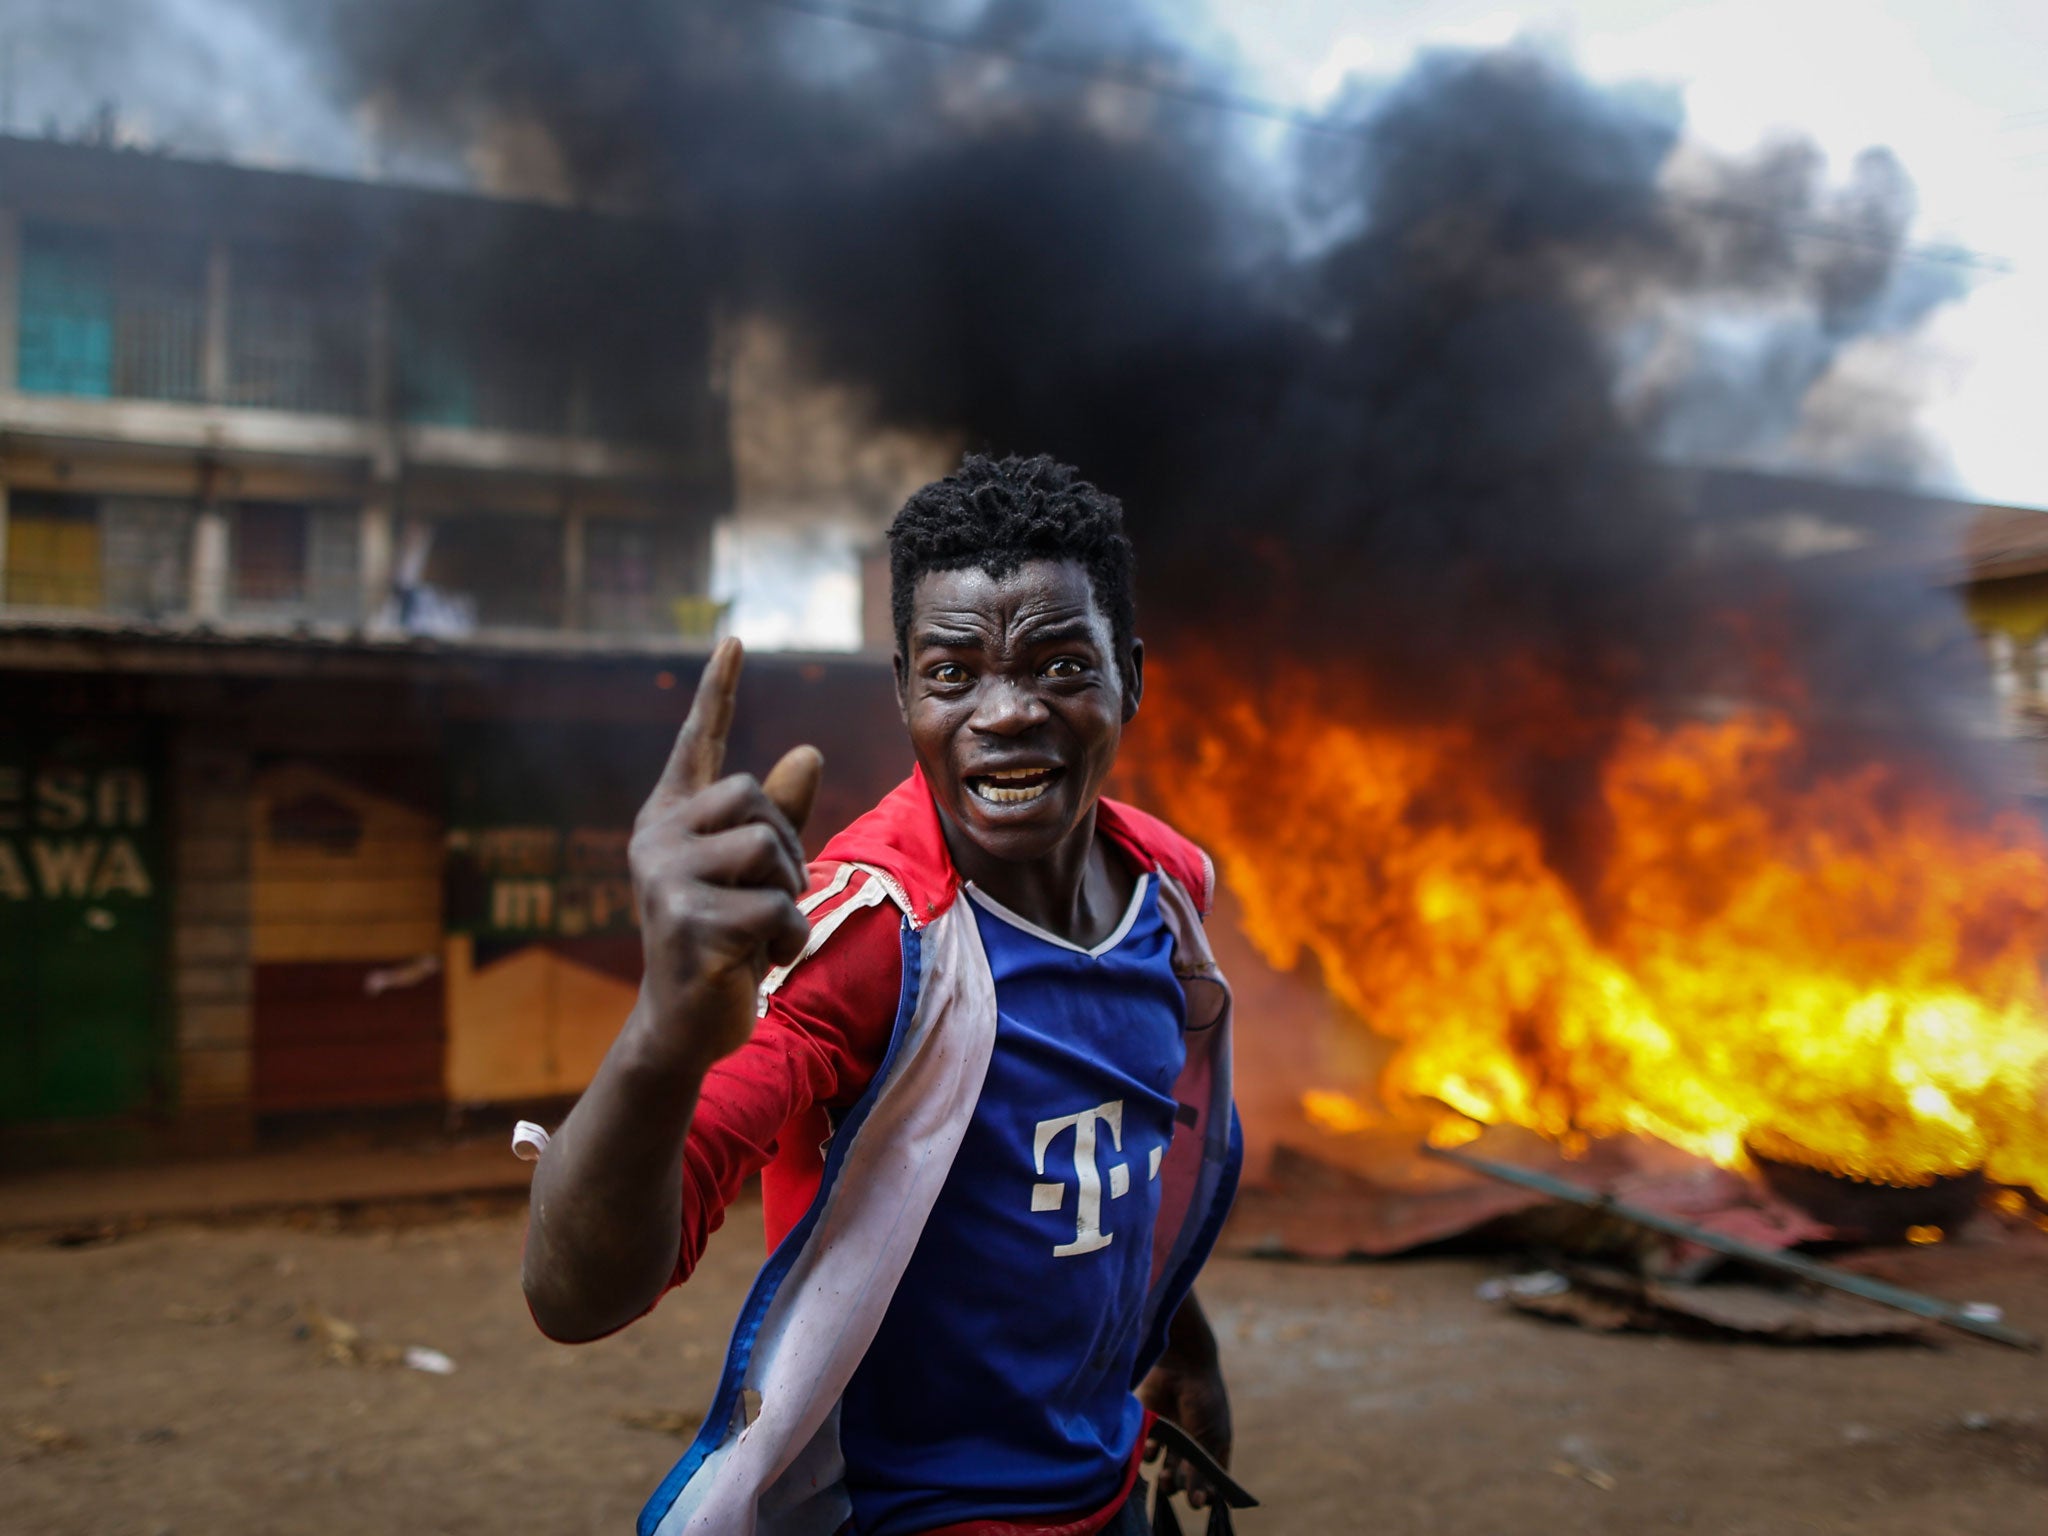 A supporter of the opposition coalition the National Super Alliance in Kawangware slum in Nairobi, Kenya, where violence broke out